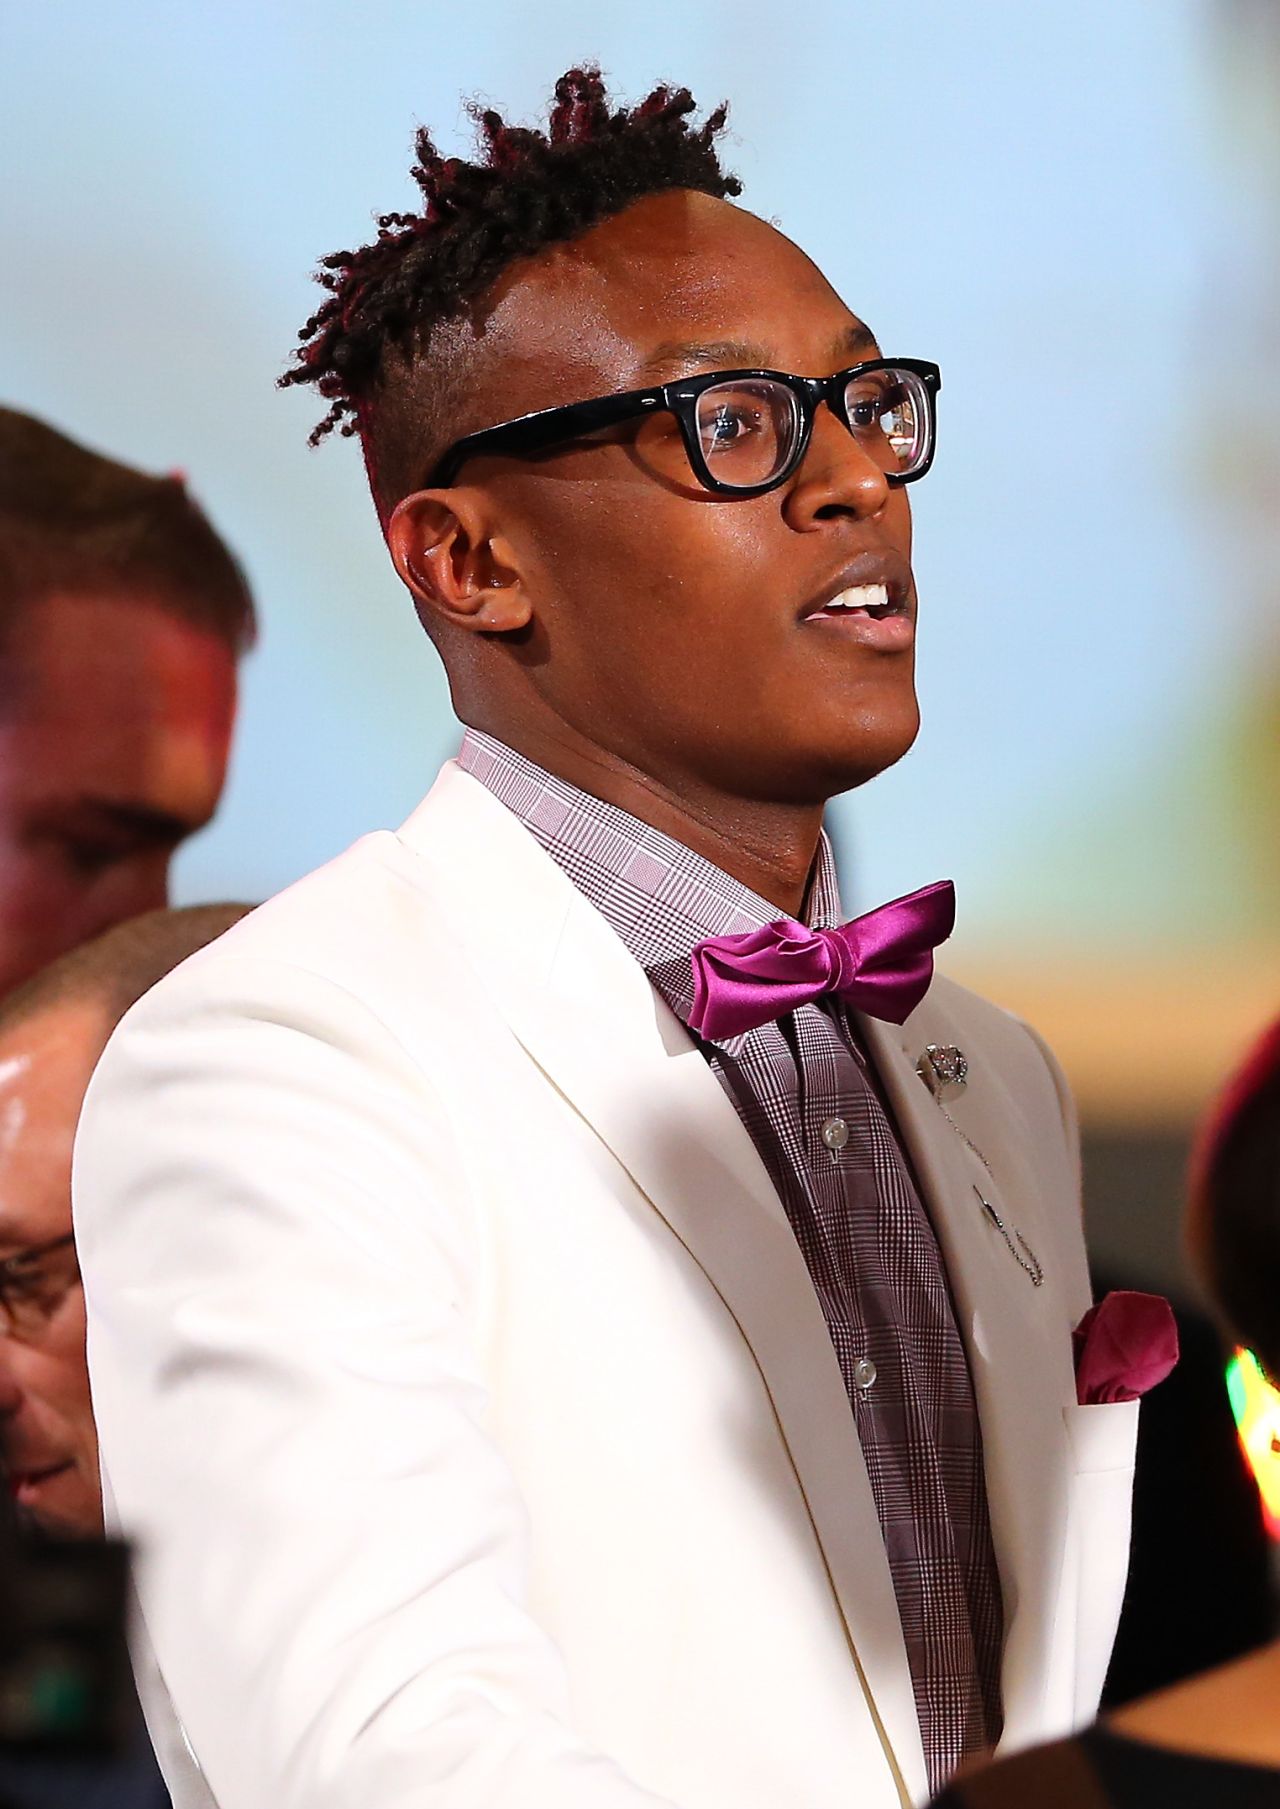 Bow tie or no bow tie? Myles Turner flaunts his violet neck accessory after being selected 11th overall by the Indiana Pacers in the first round of the 2015 draft.